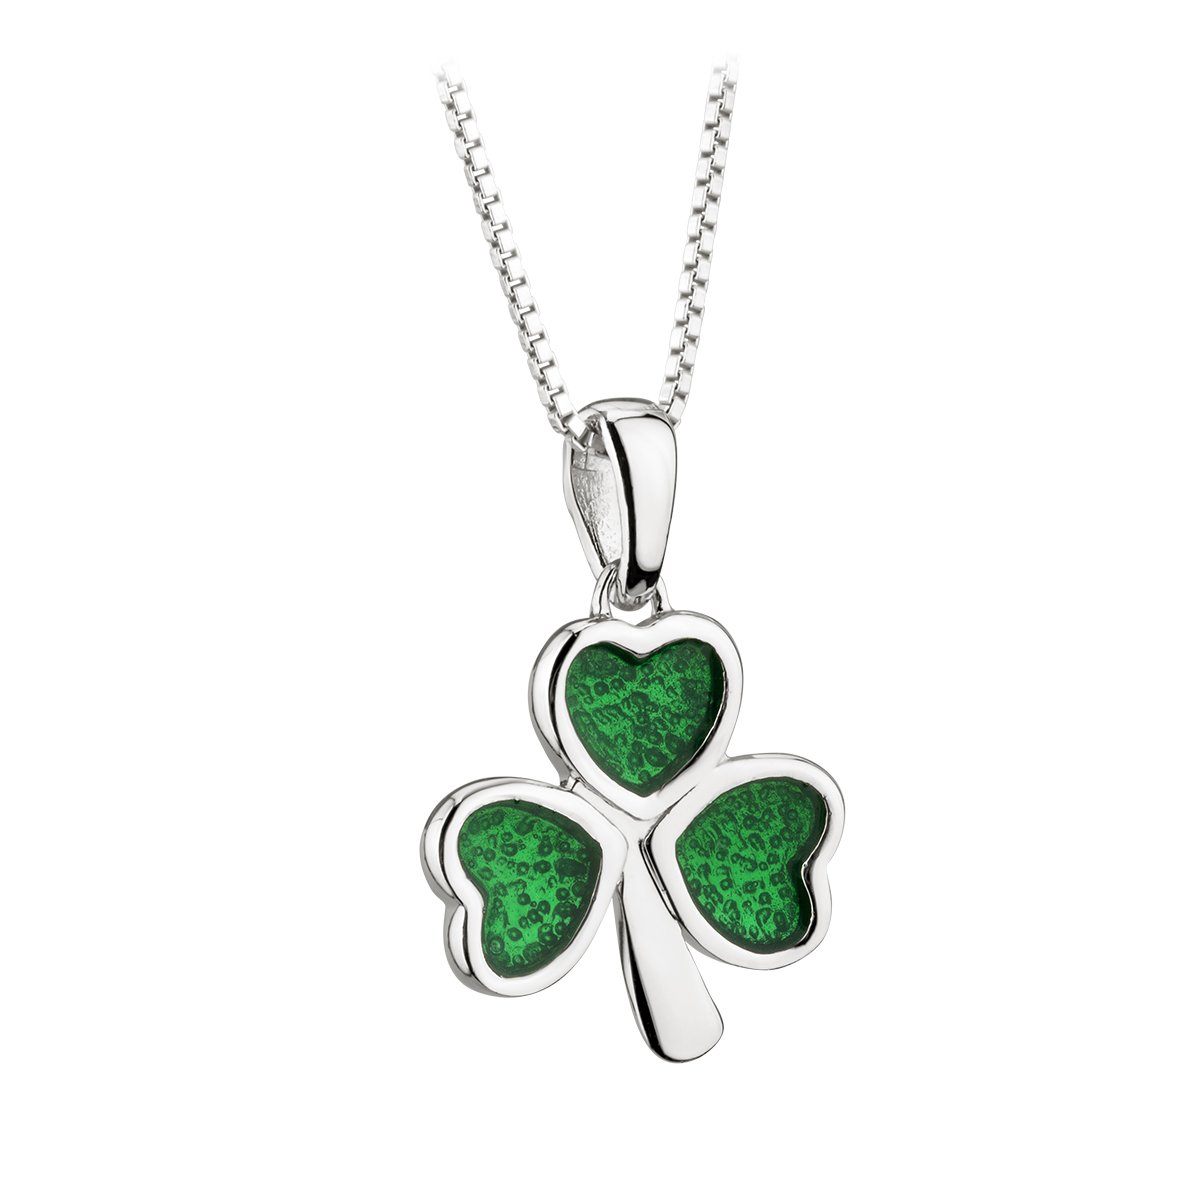 Shamrock Necklace Sterling Silver Green Enamel Sturdy 18" Box Chain Irish Necklace Lucky Irish Gift Crafted by Our Maker-Partner in Co. Dublin